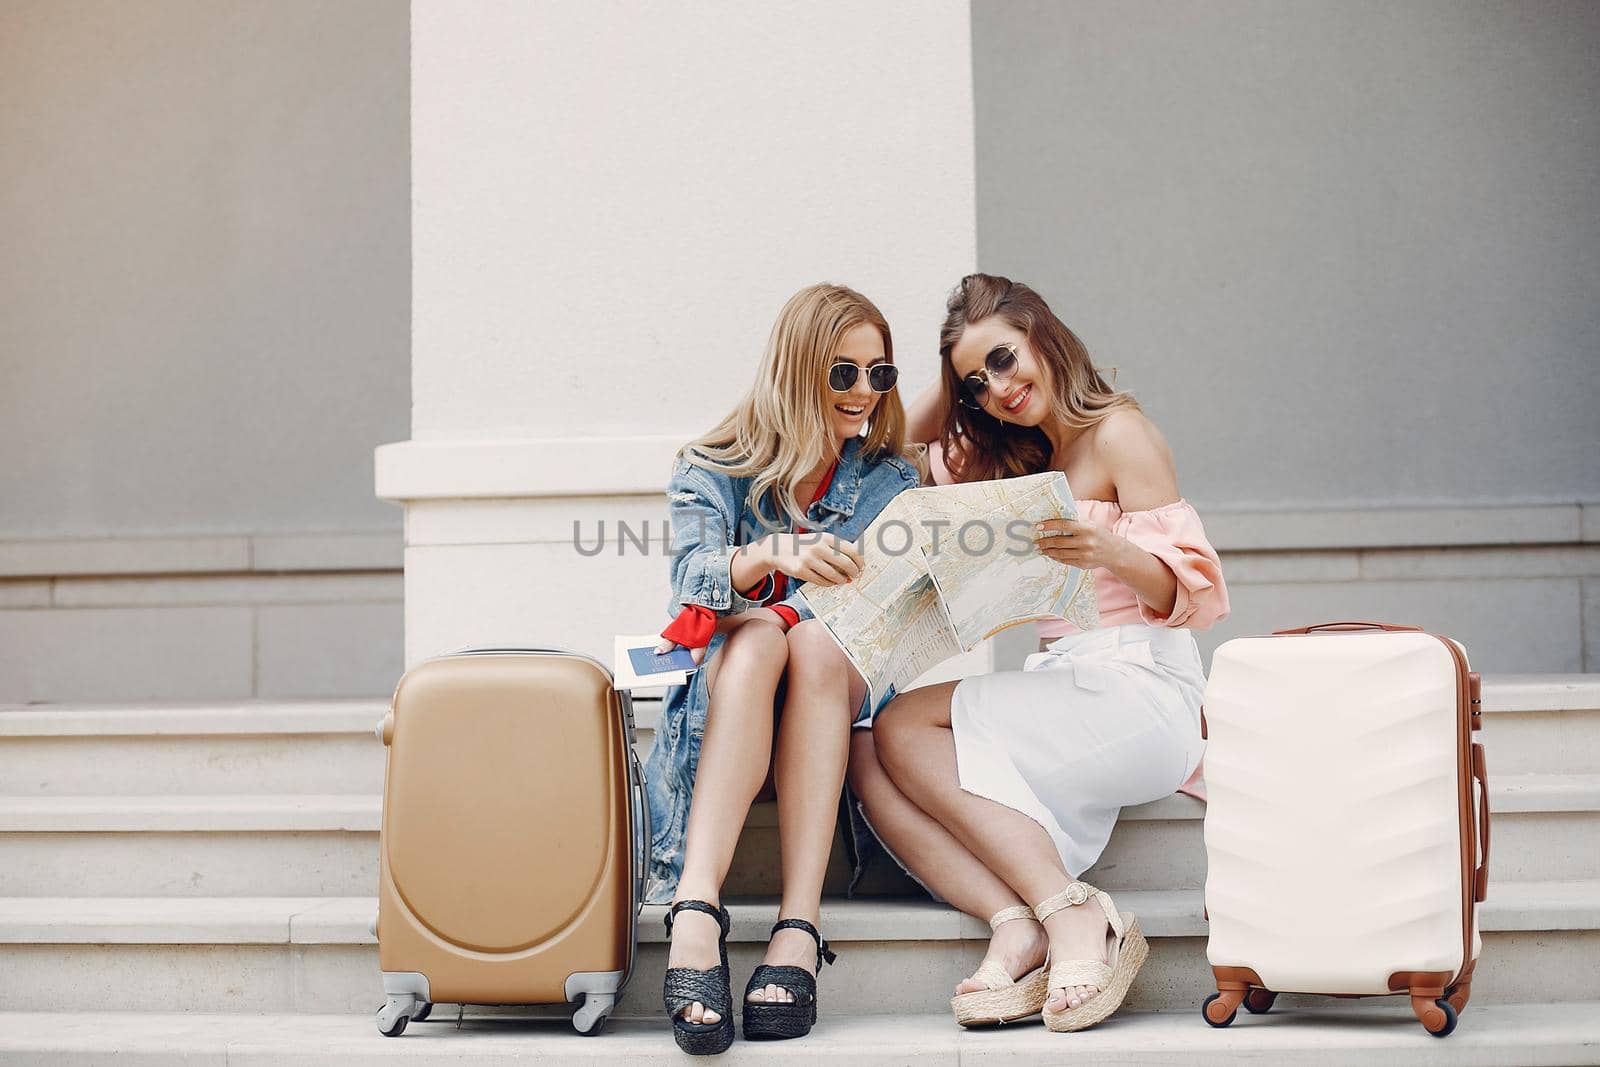 Elegant and stylish girl sitting with a suitcase by prostooleh